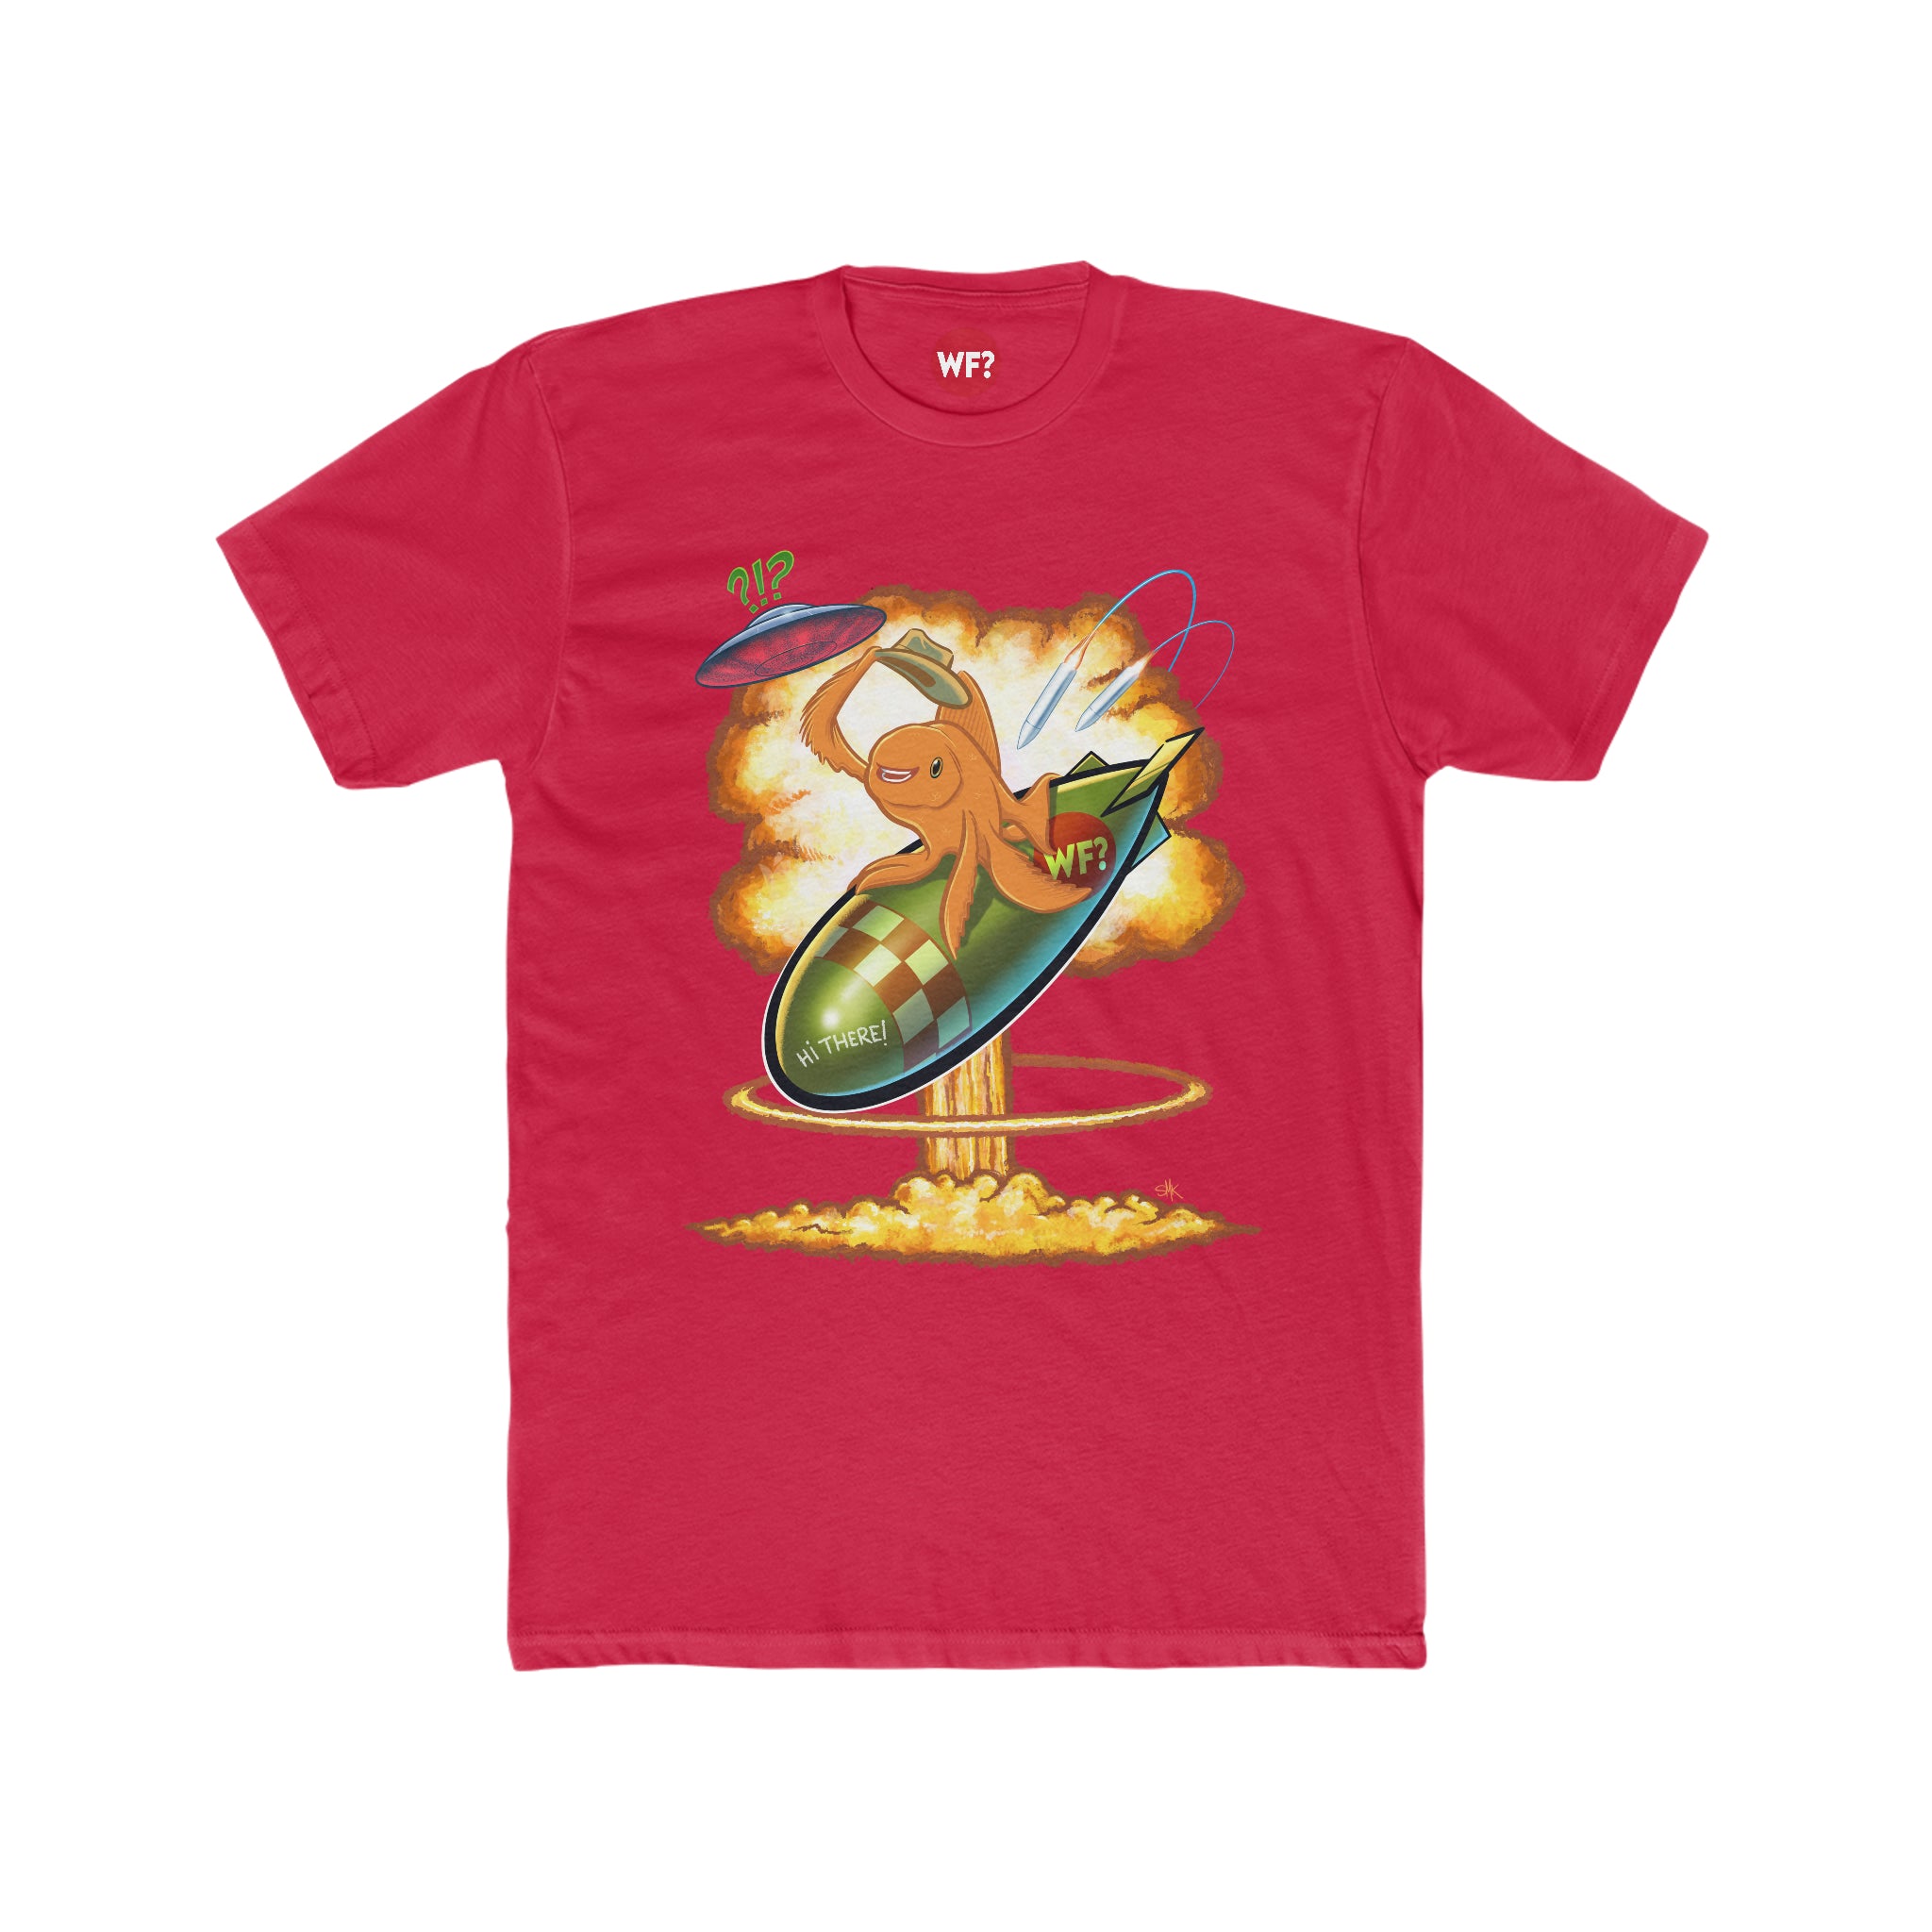 Buy solid-red World War 3 Limited T-Shirt